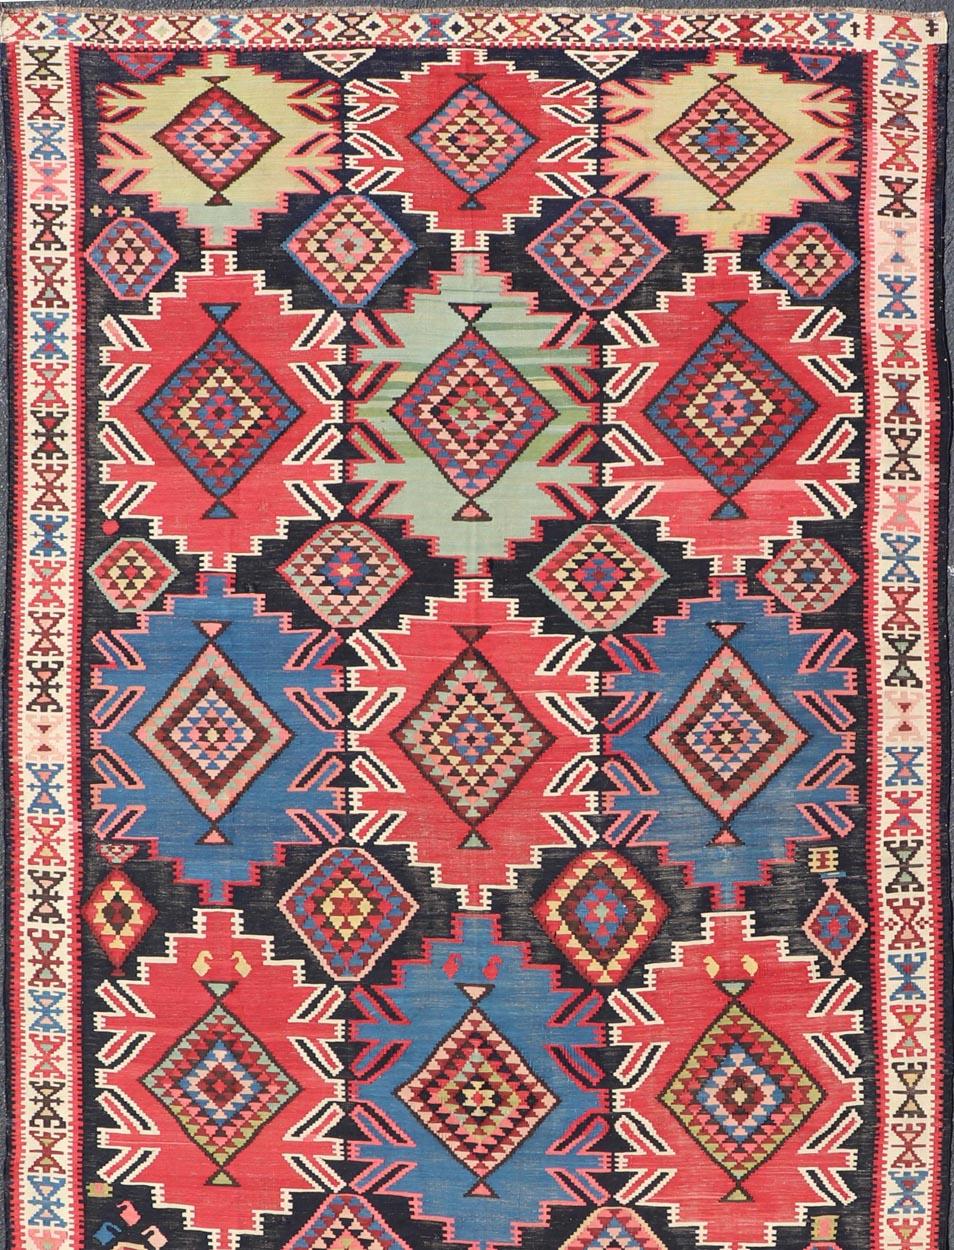 Kazak 19th Century Antique Kuba Kilim Gallery Rug in with Vibrant Colors For Sale